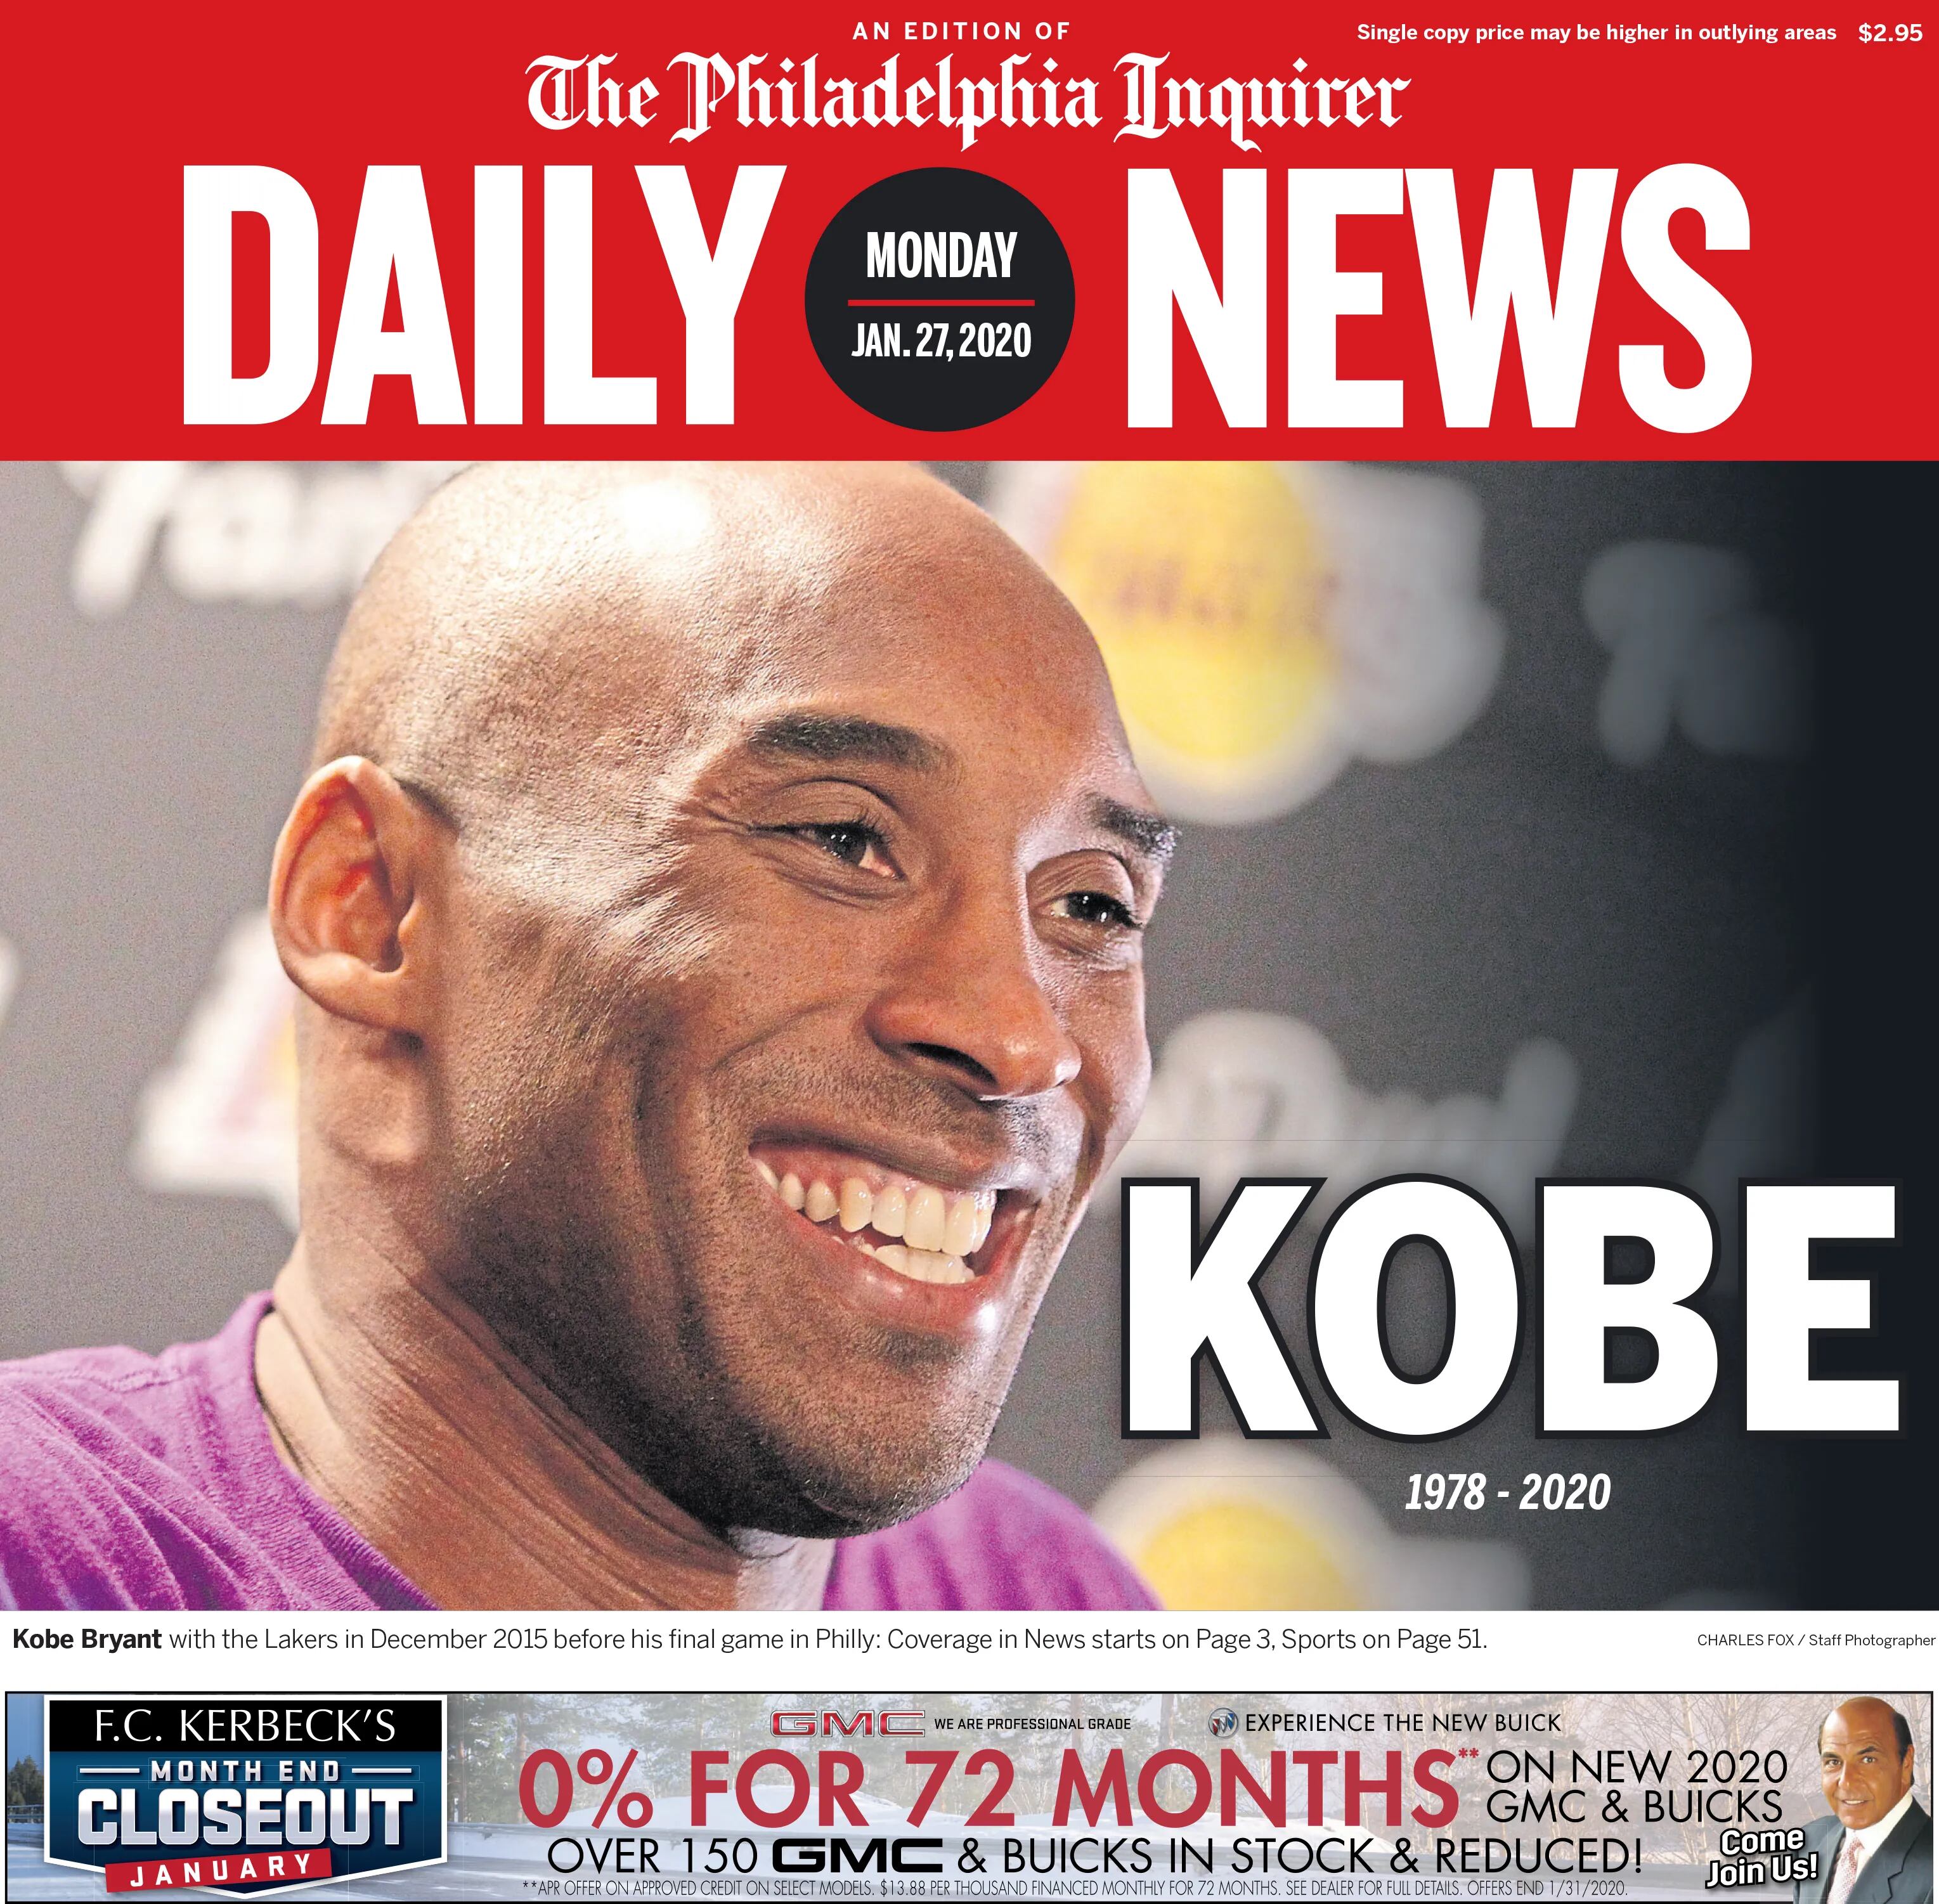 Remembering the life and career of Kobe Bryant – New York Daily News